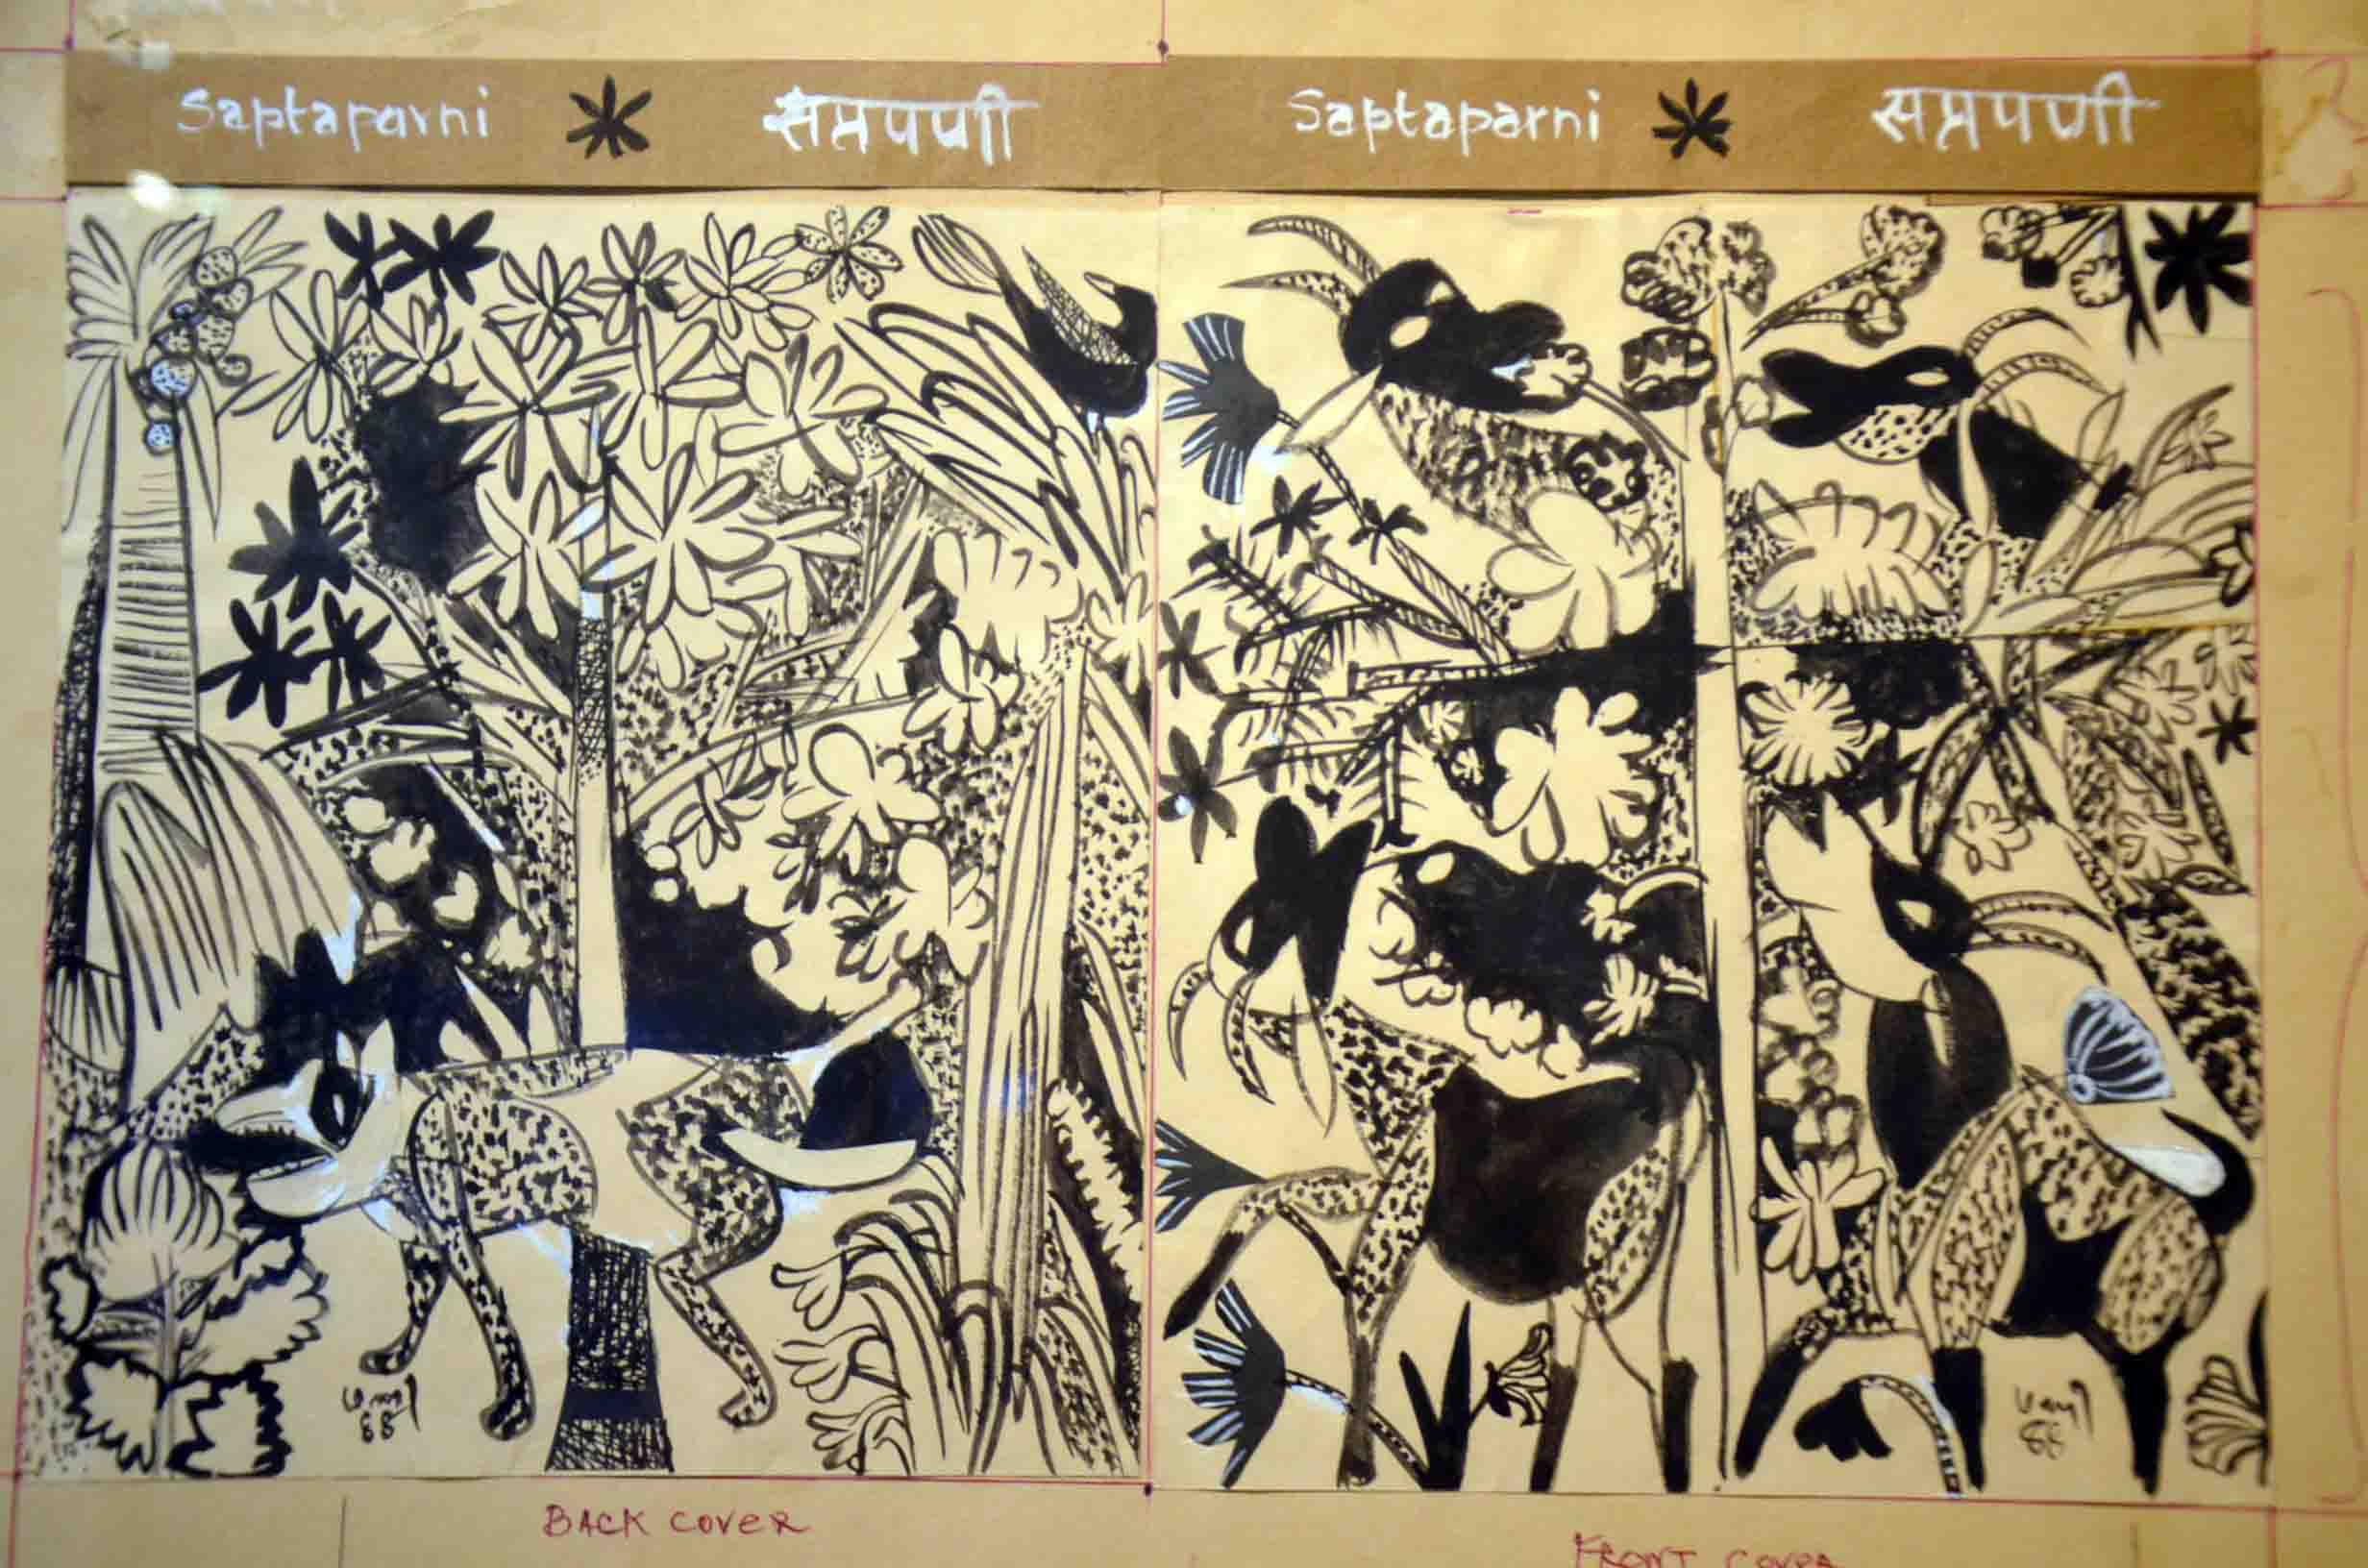 K. G. SUBRAMANYAN ORIGINAL DESGIN FOR A BOOK COVER WATERCOLOR 10X15 IN END TO END 13 X19.5 IN 1988